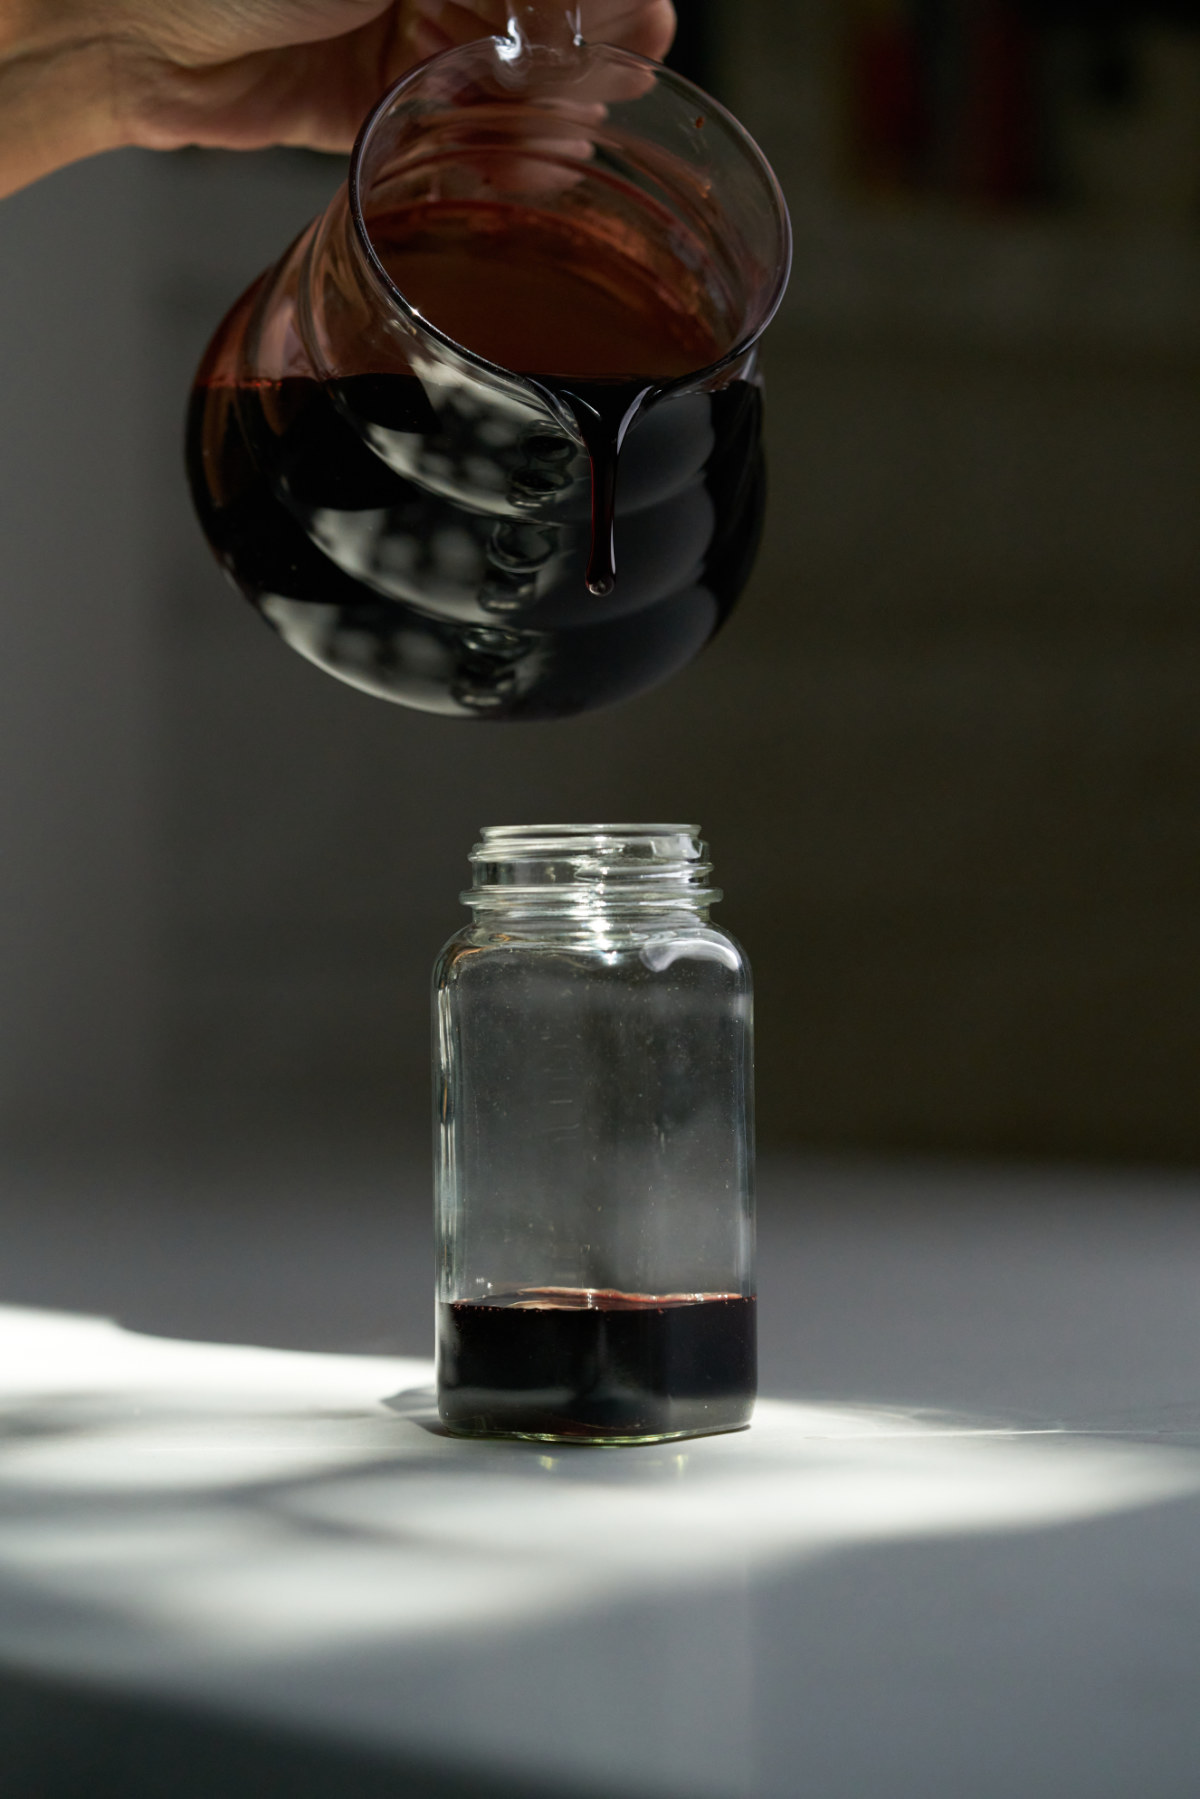 Pouring burgundy syrup into a small glass jar from a glass pitcher.